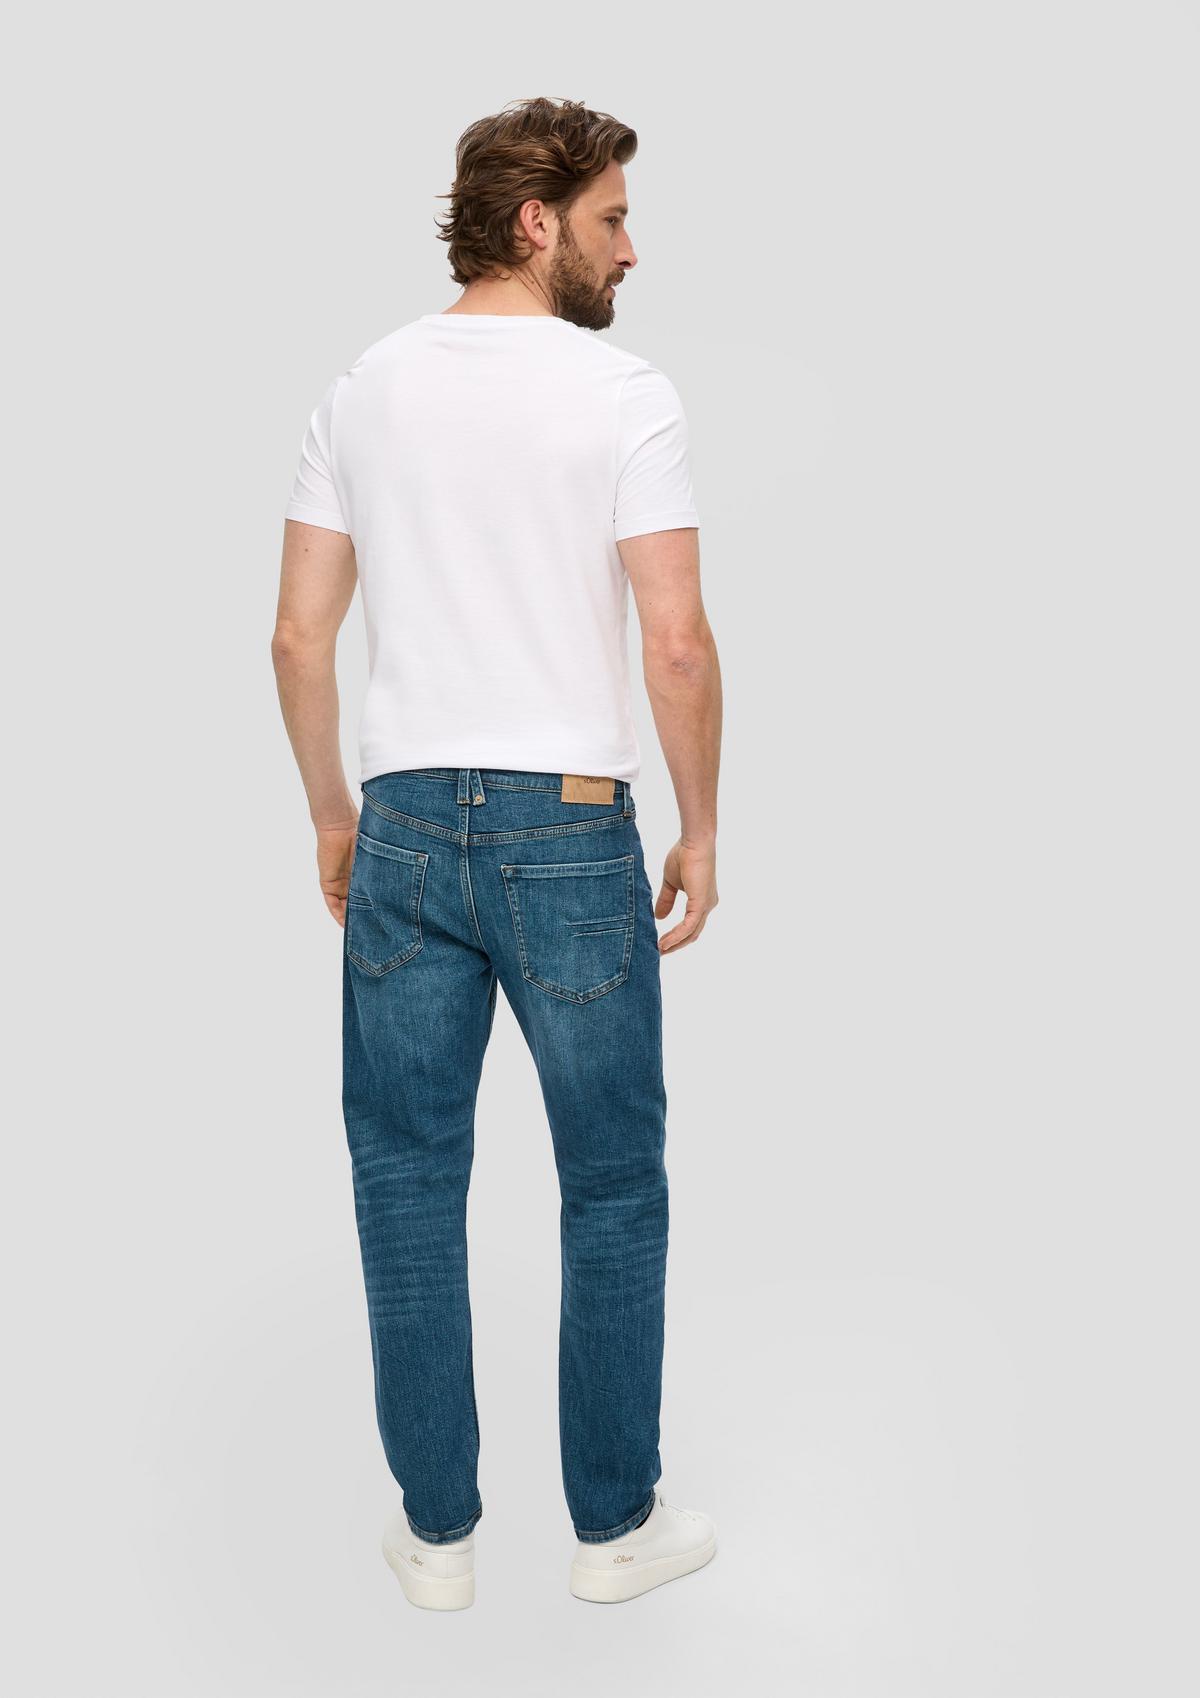 s.Oliver Jeans Mauro / Regular Fit / High Rise / Tapered Leg